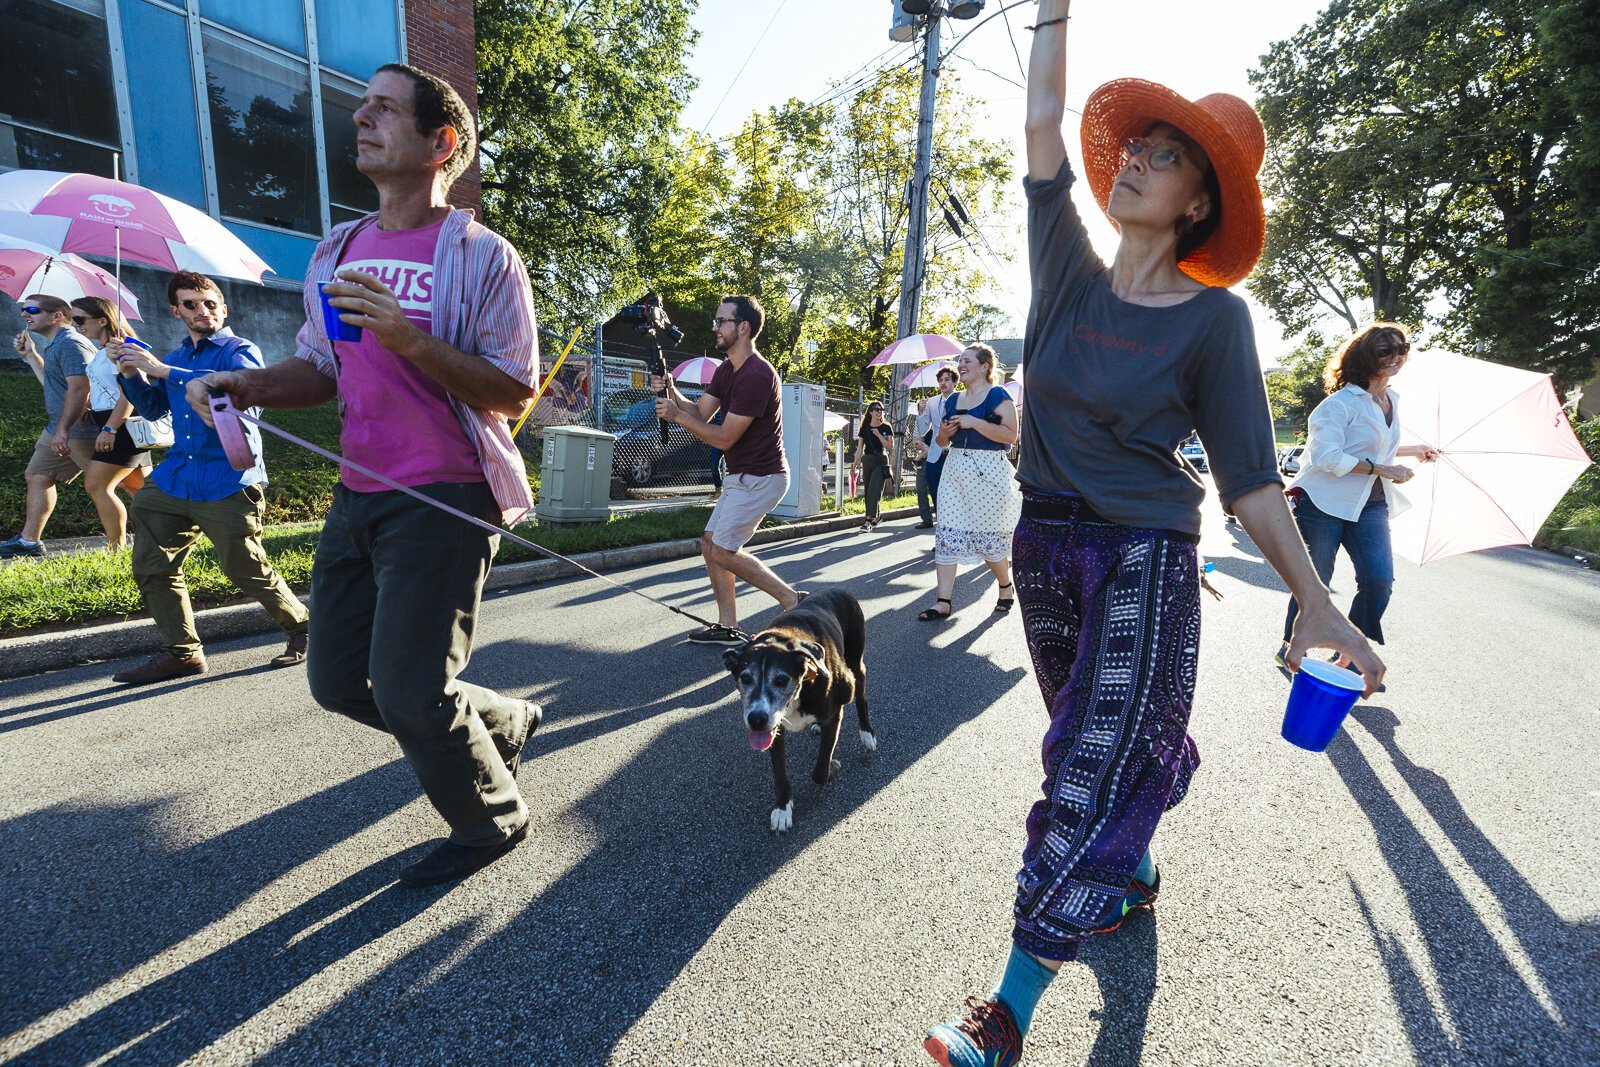 The second line parade through the streets of Madison Heights was lead by the Mighty Souls Brass Band. (Ziggy Mack) 